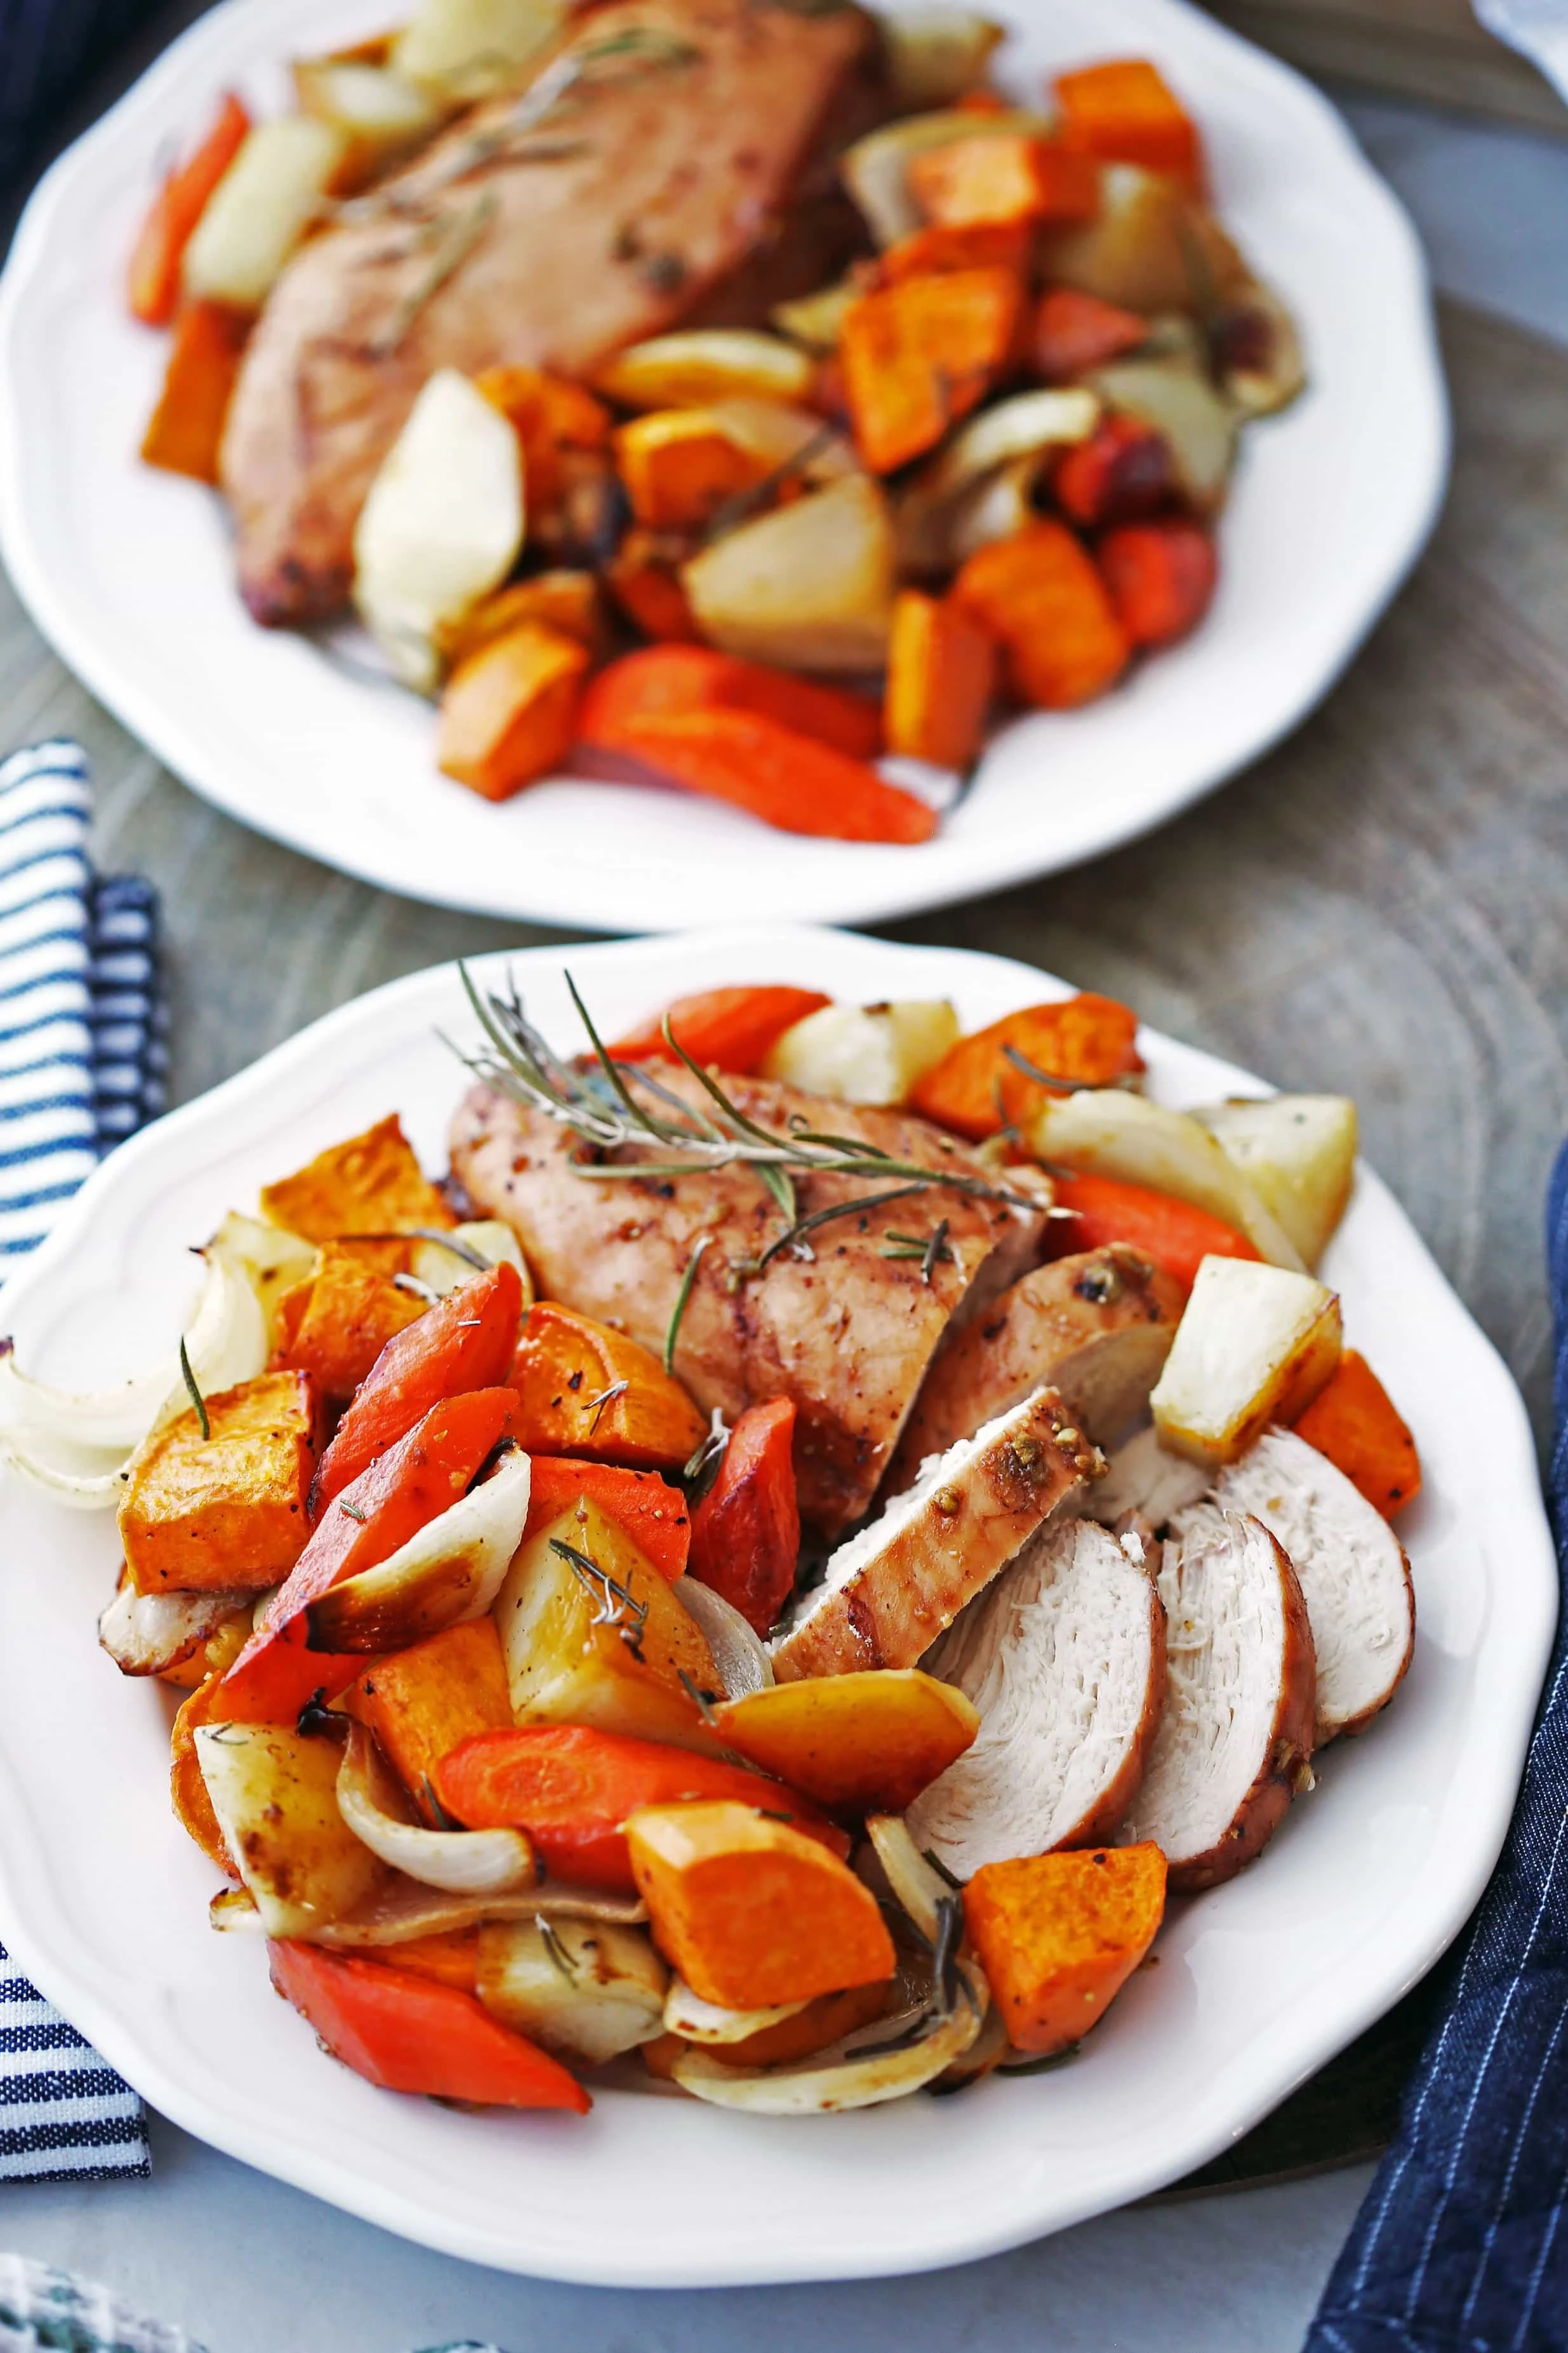 Two white plates containing baked balsamic chicken breasts and roasted vegetables, including potatoes and carrots.